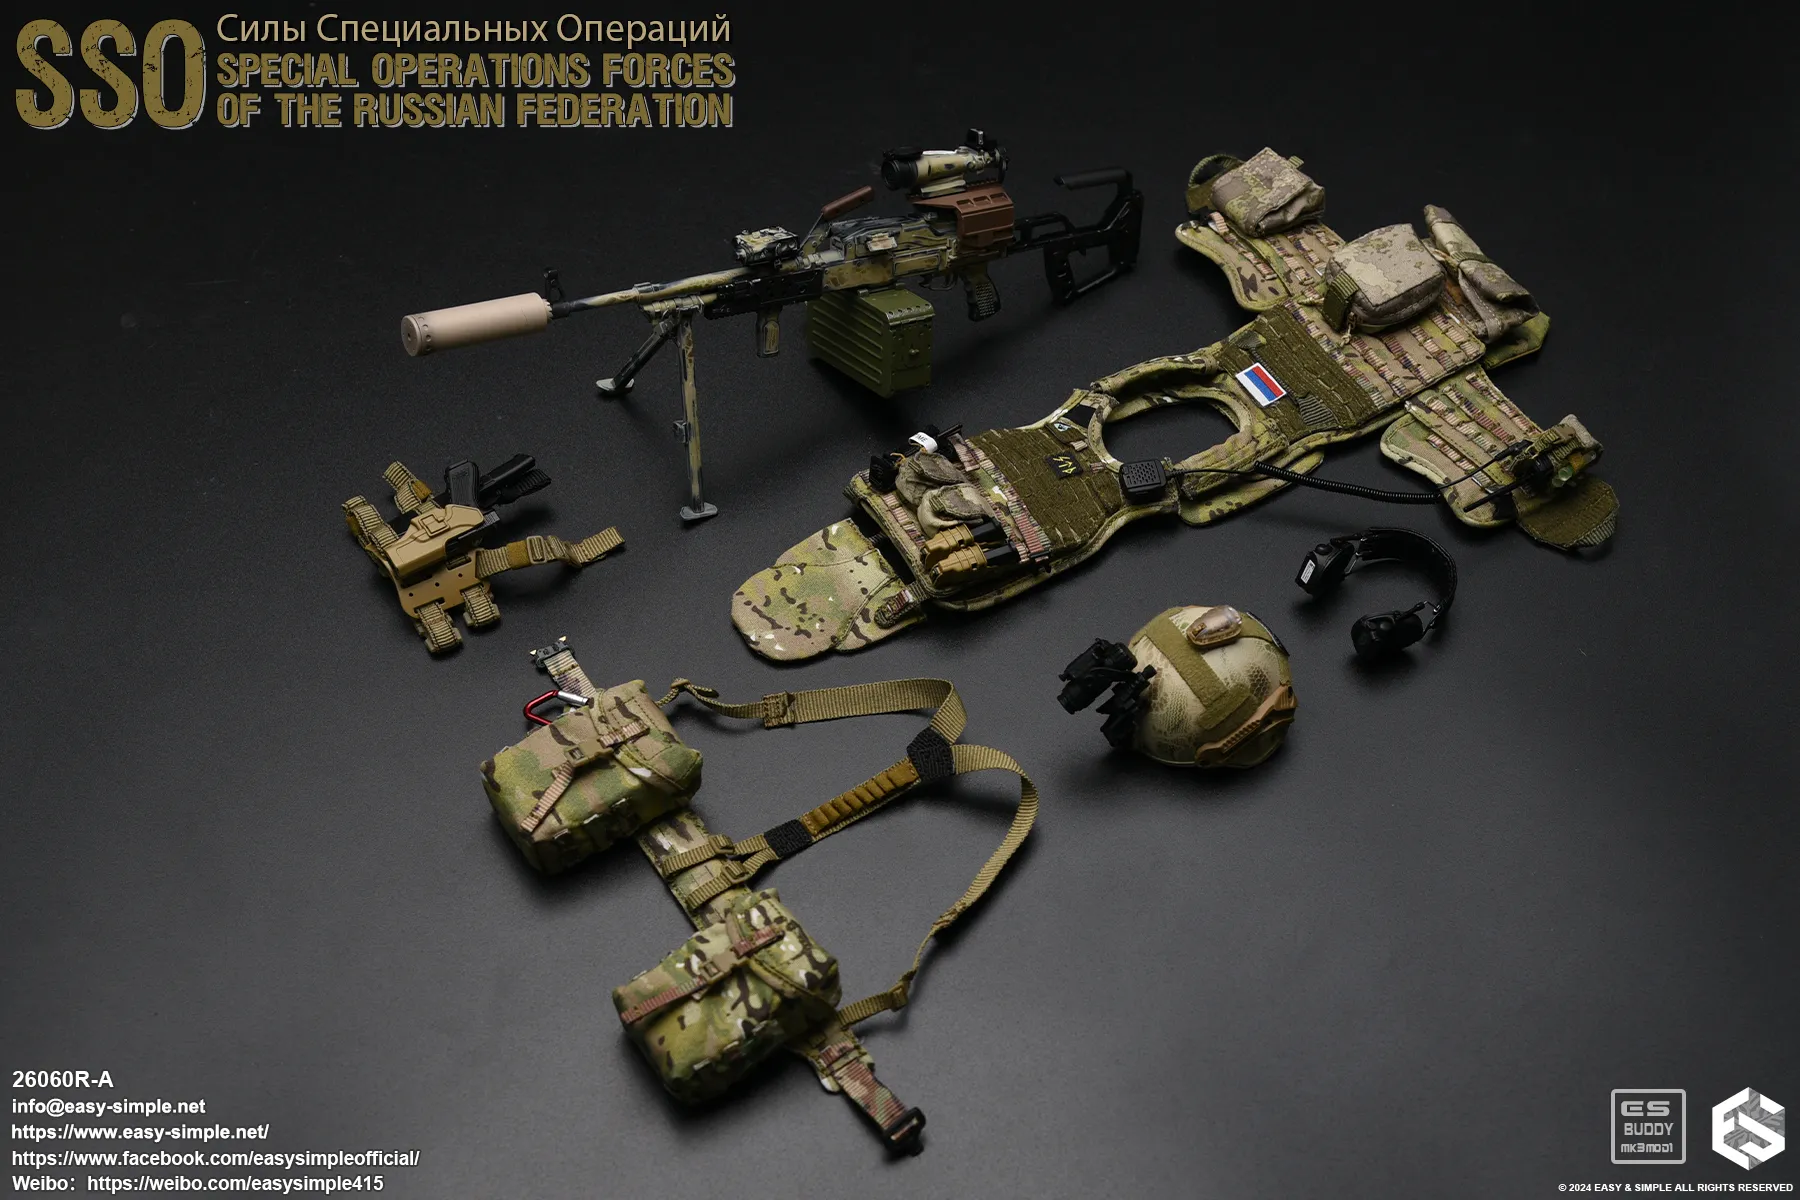 operations - NEW PRODUCT: Easy&Simple 26060R-A Russian Special Operations Forces (SSO) Format,webp